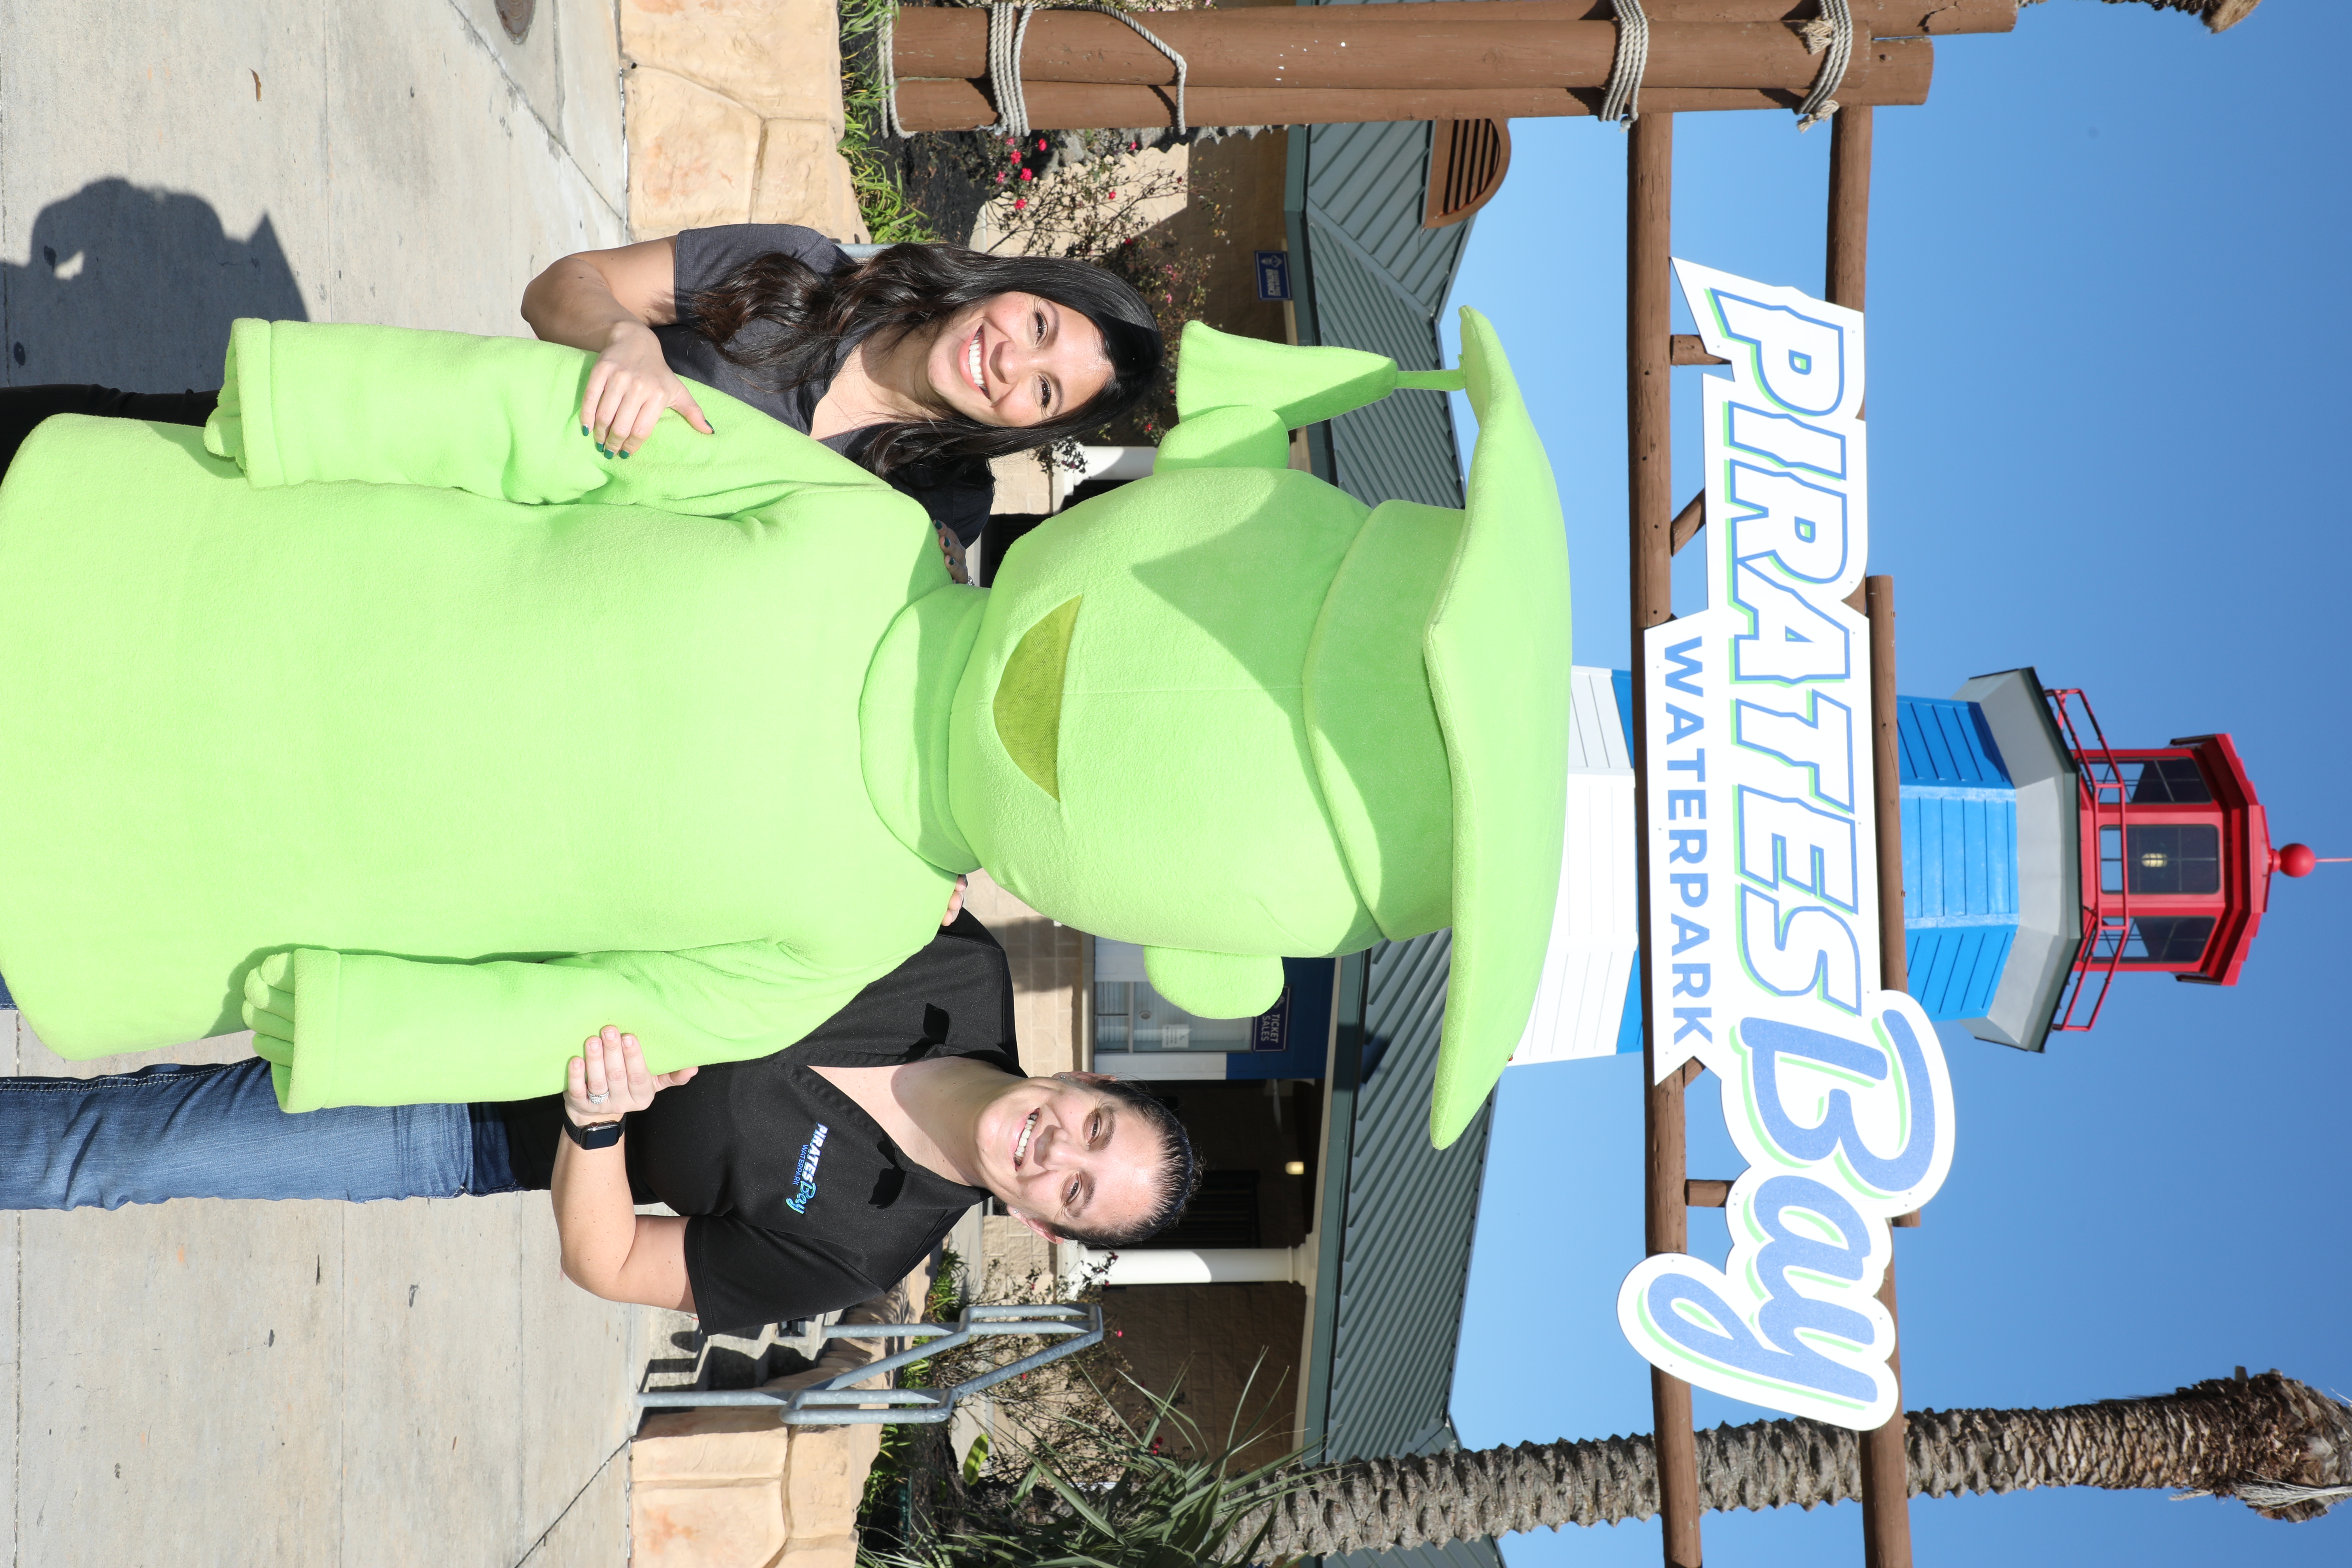 Erika Foster GCCISD edfo director and city of baytown stand next to giant mascot at pirates bay